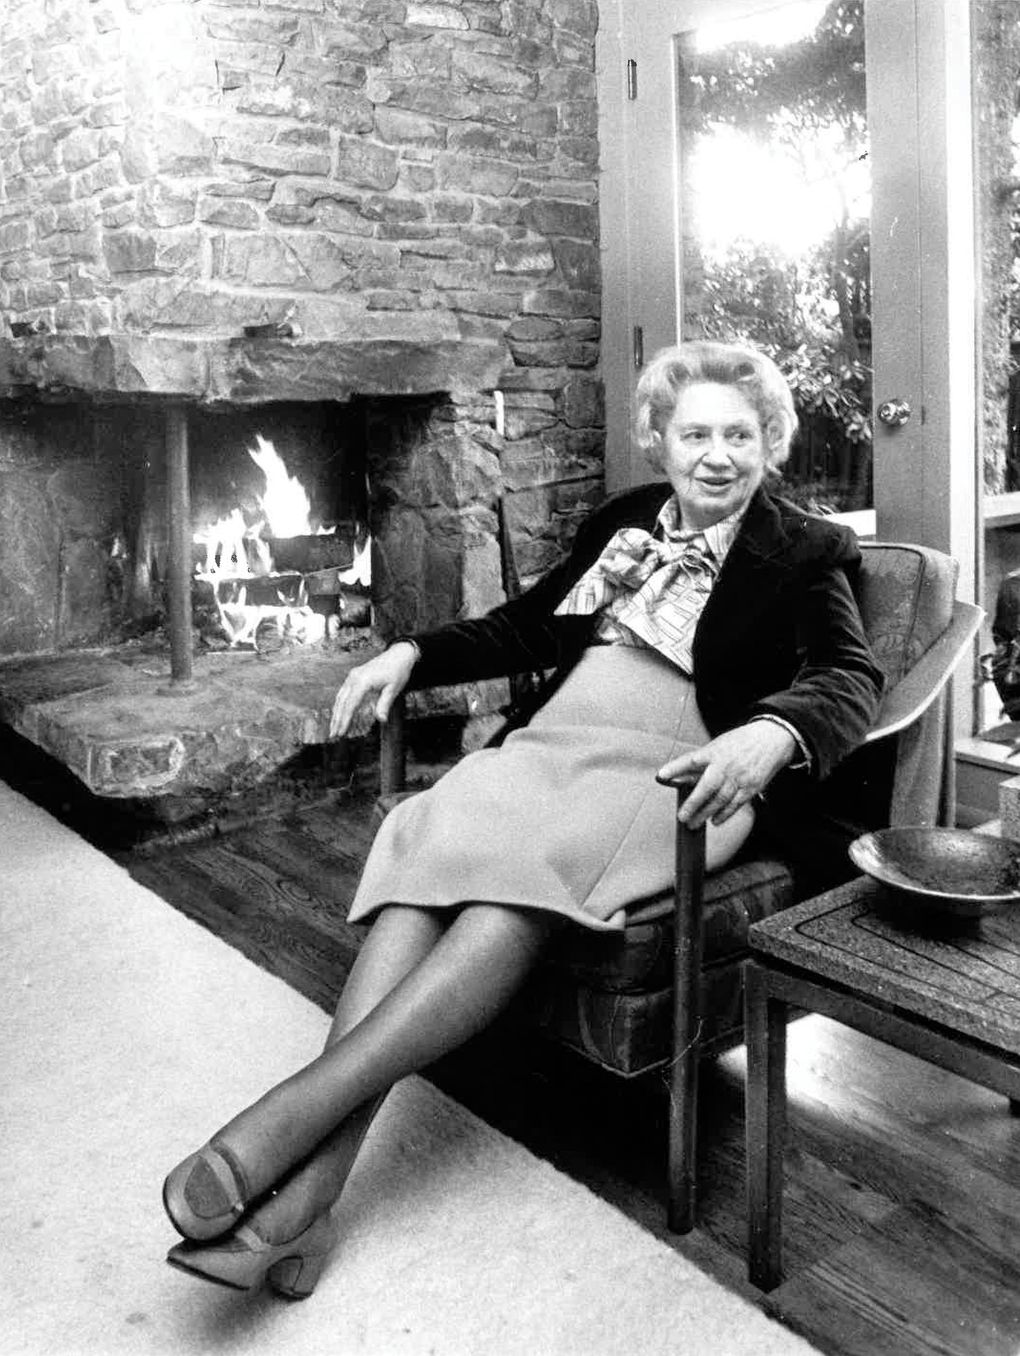 Hope Foote relaxes in the Windermere home she designed for herself in 1951. (MOHAI, Seattle Post-Intelligencer Collection, 2000.107.067.43.01)